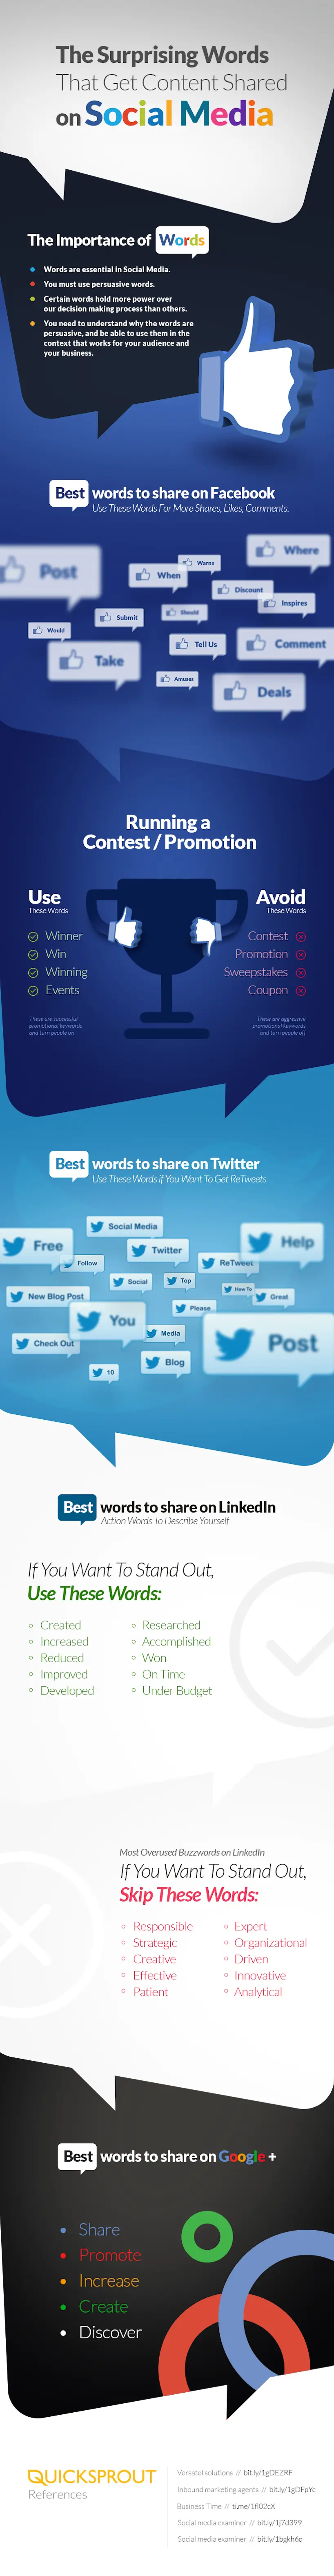 The Surprising Words That Get Content Shared on Social Media